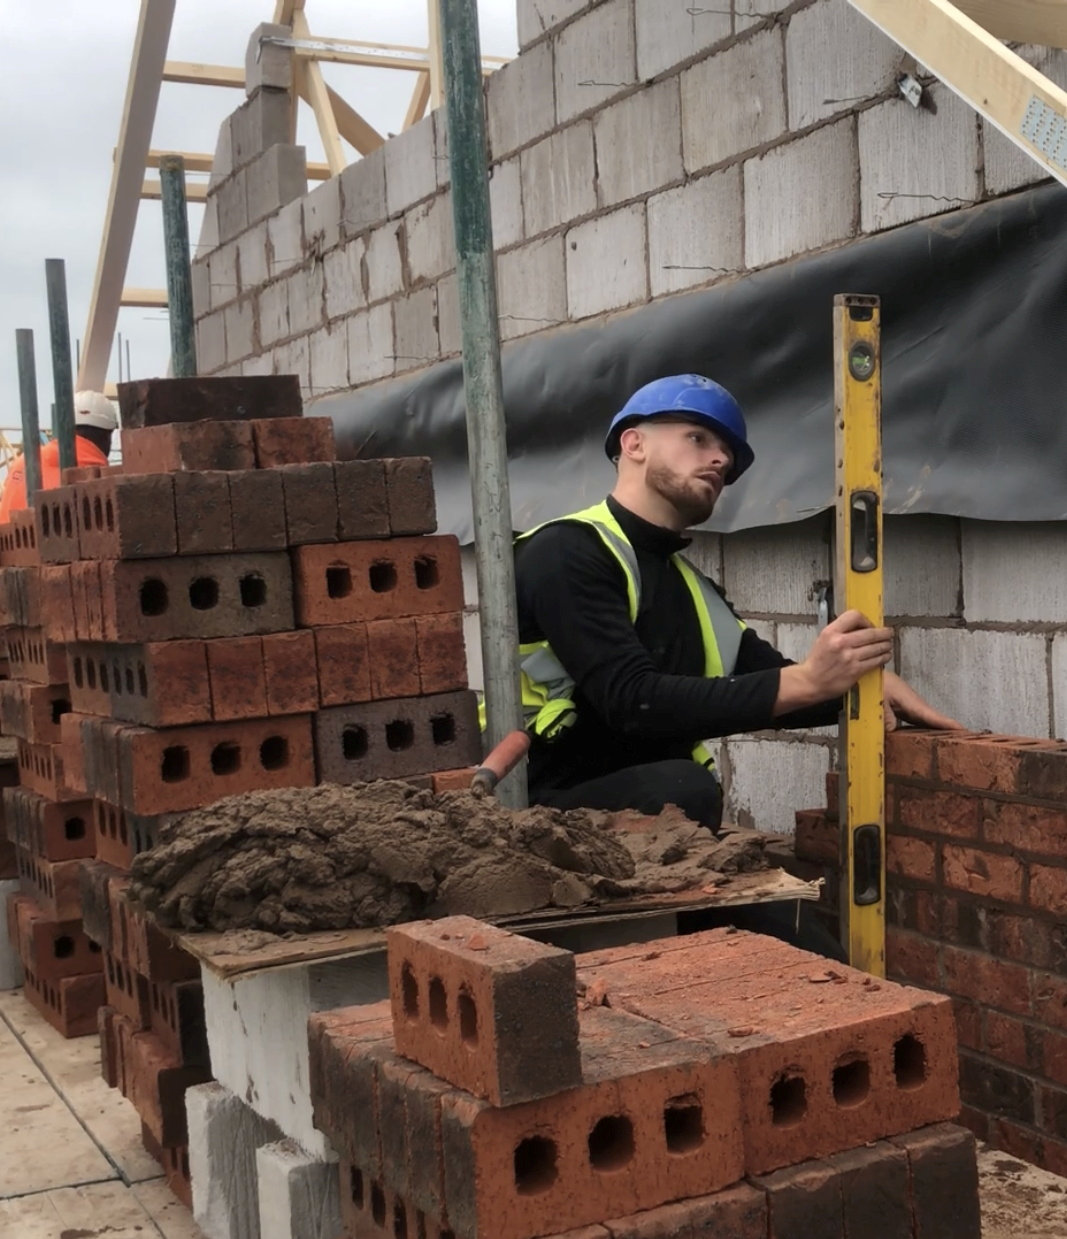 The 26-year-old bricklaying on a building site